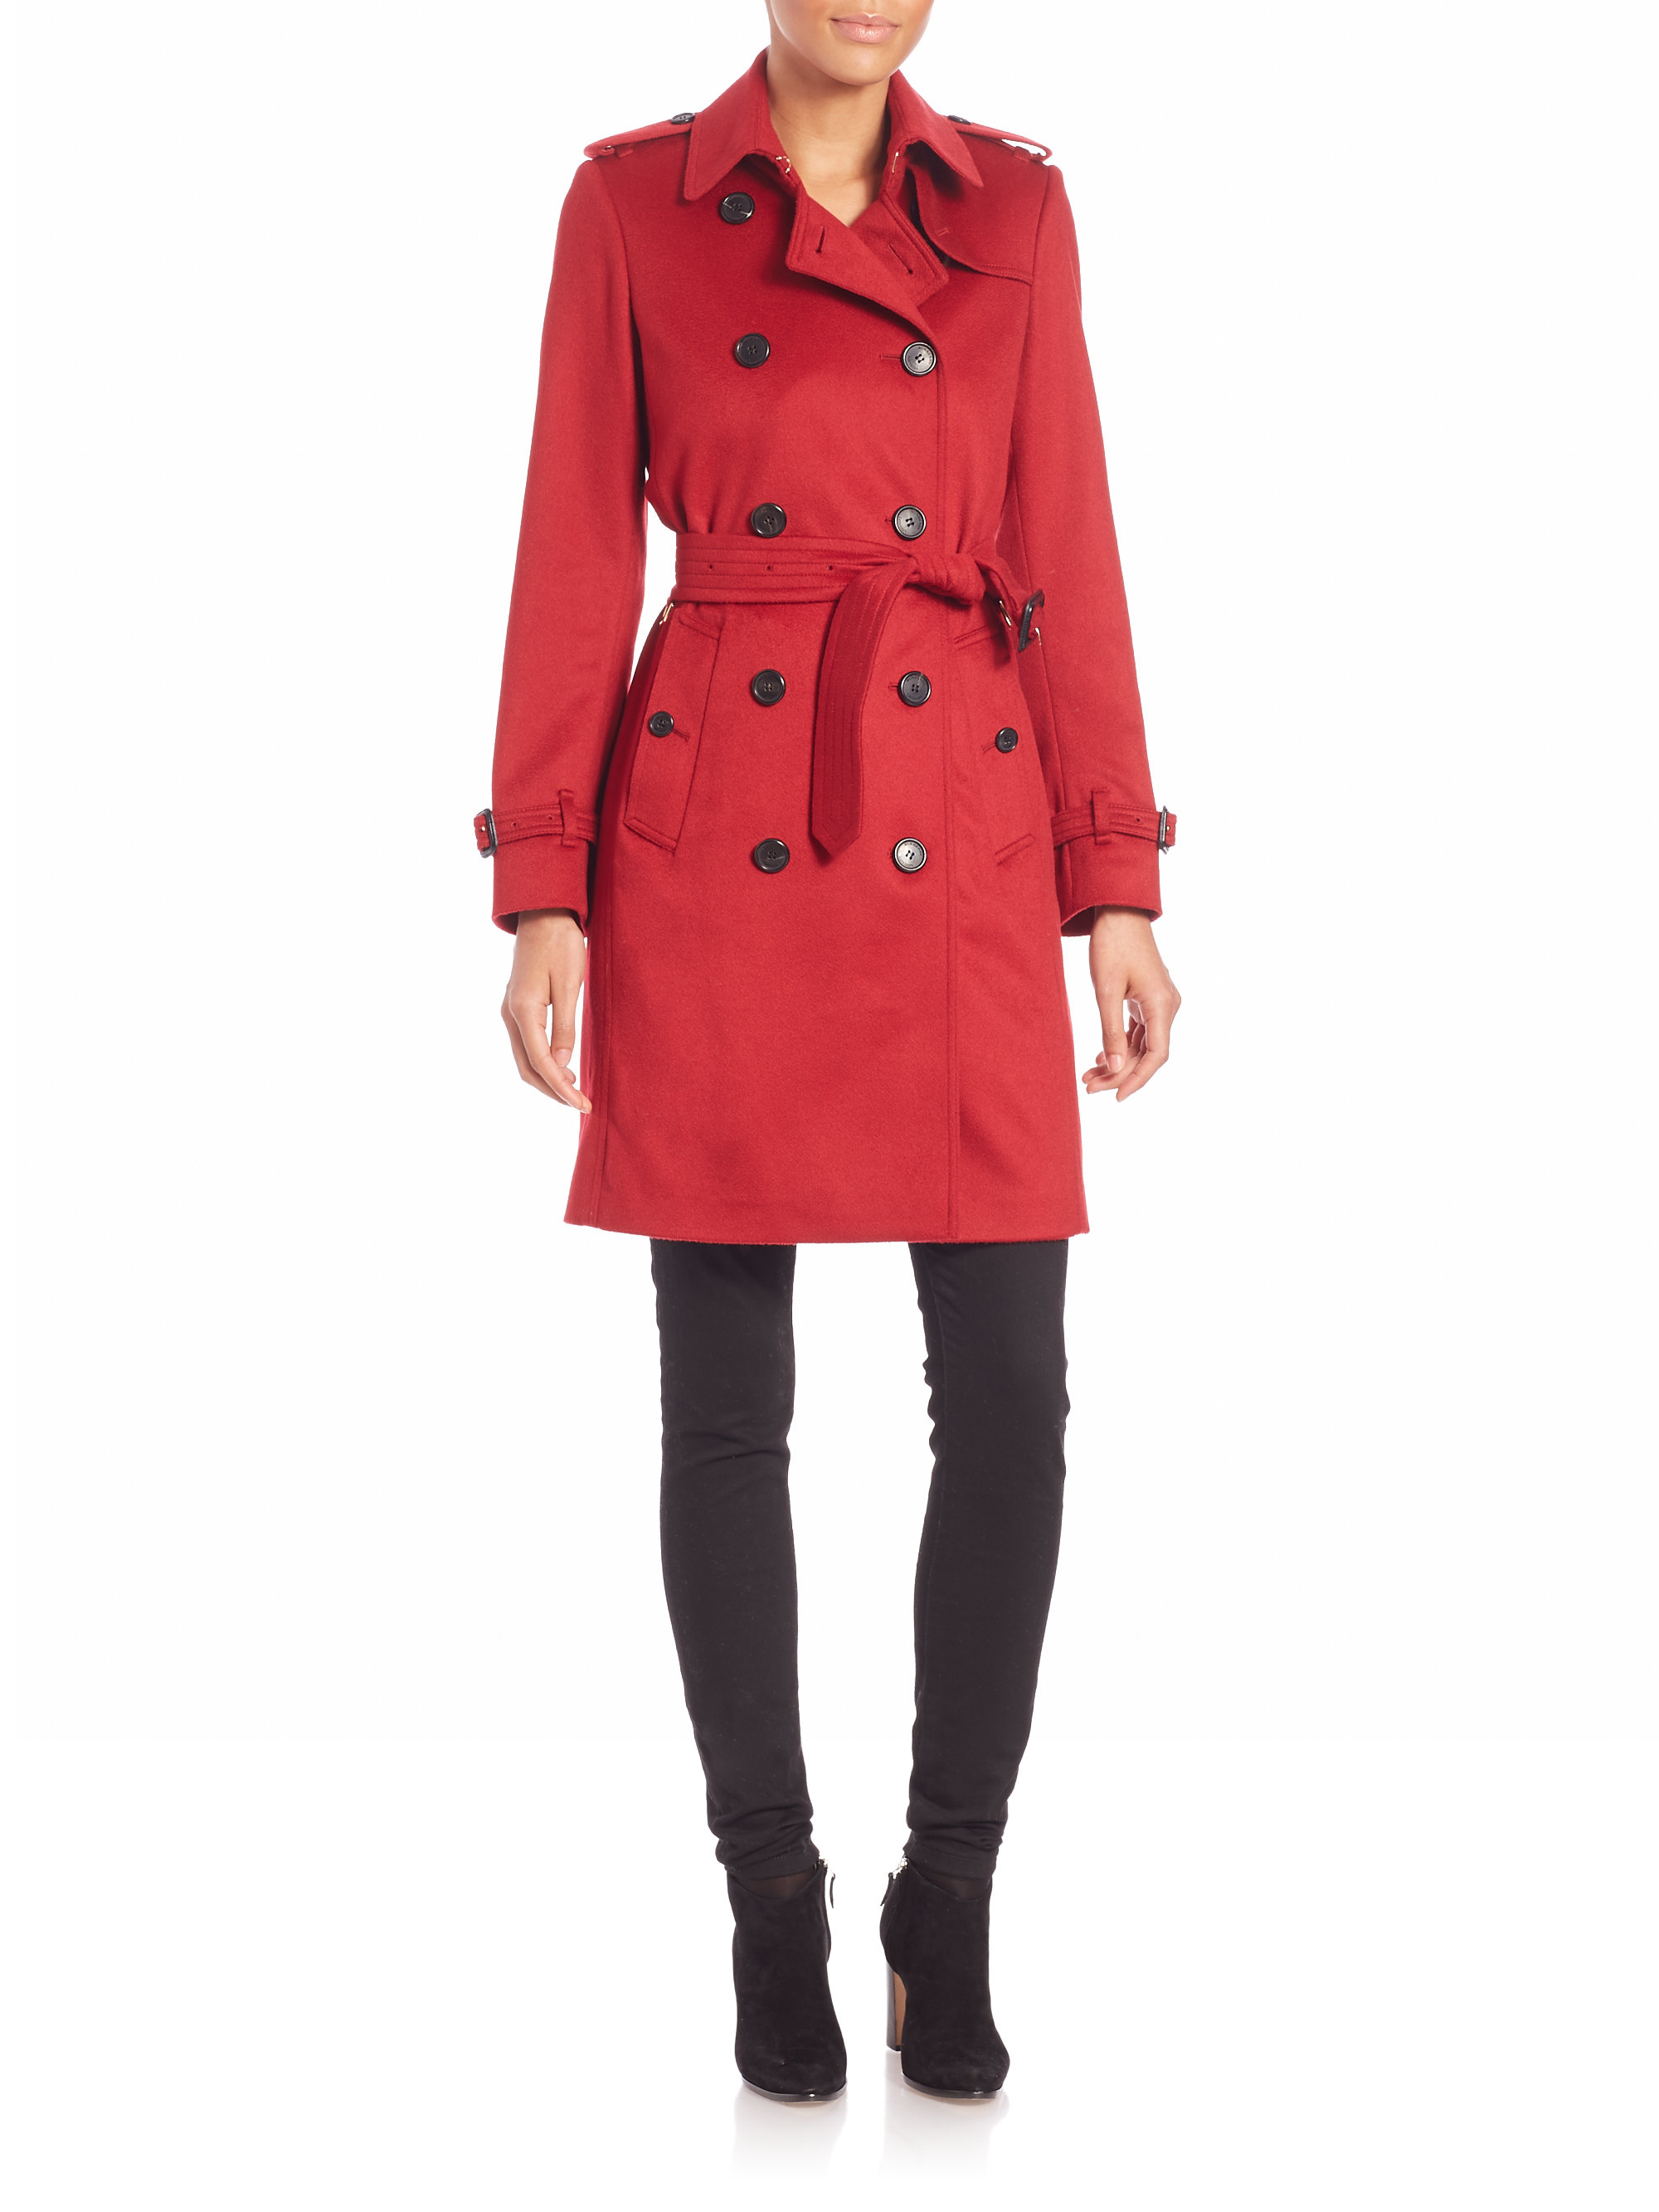 Burberry Kensington Parade Red Cashmere Trench Coat - Lyst